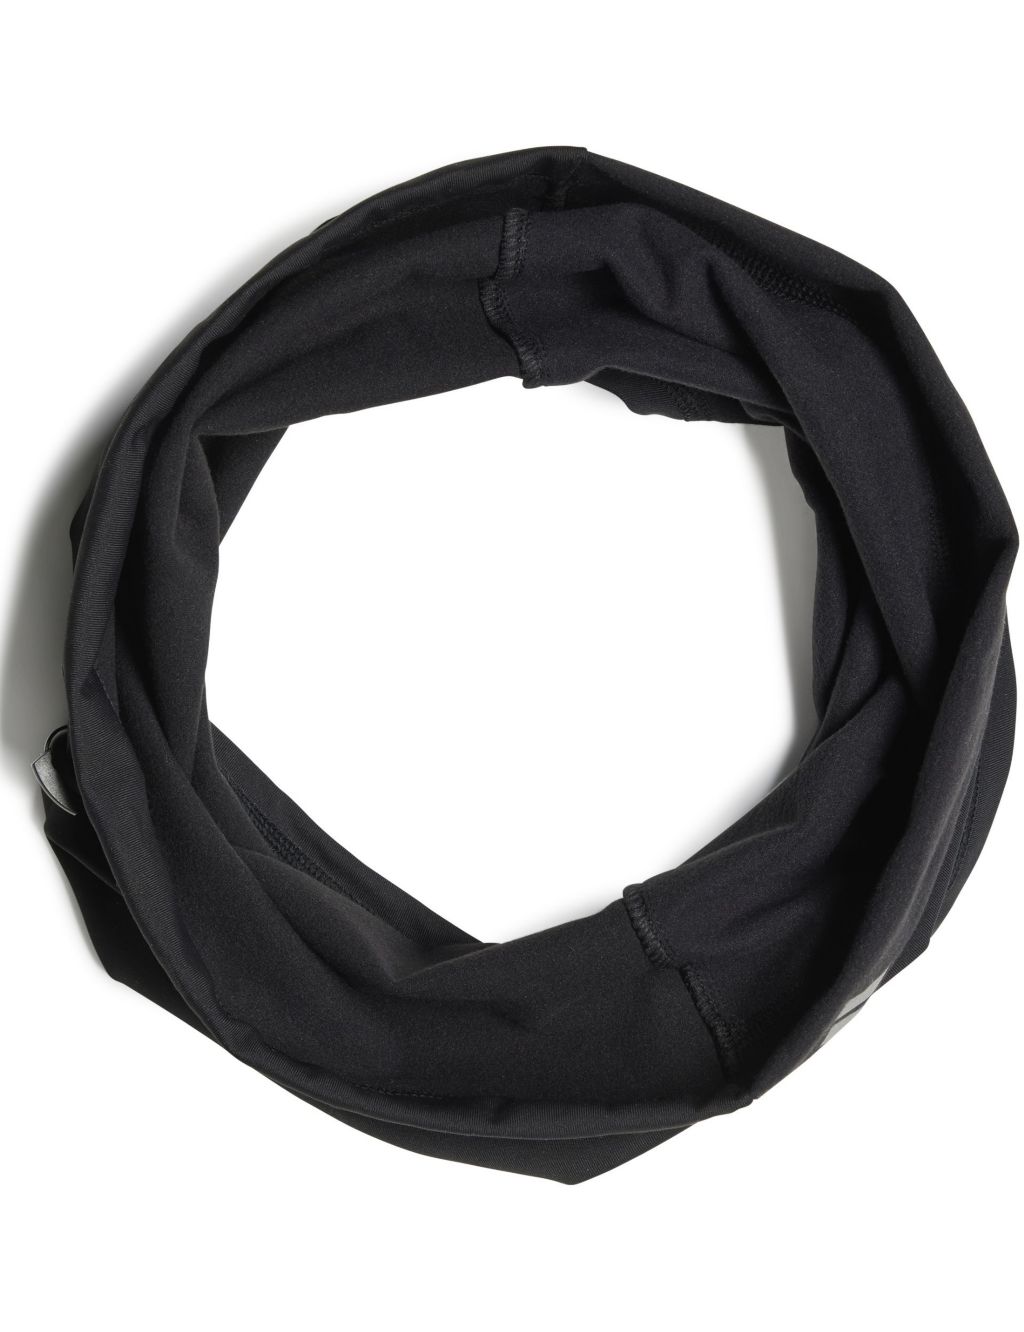 Cold Ready Running Snood image 1